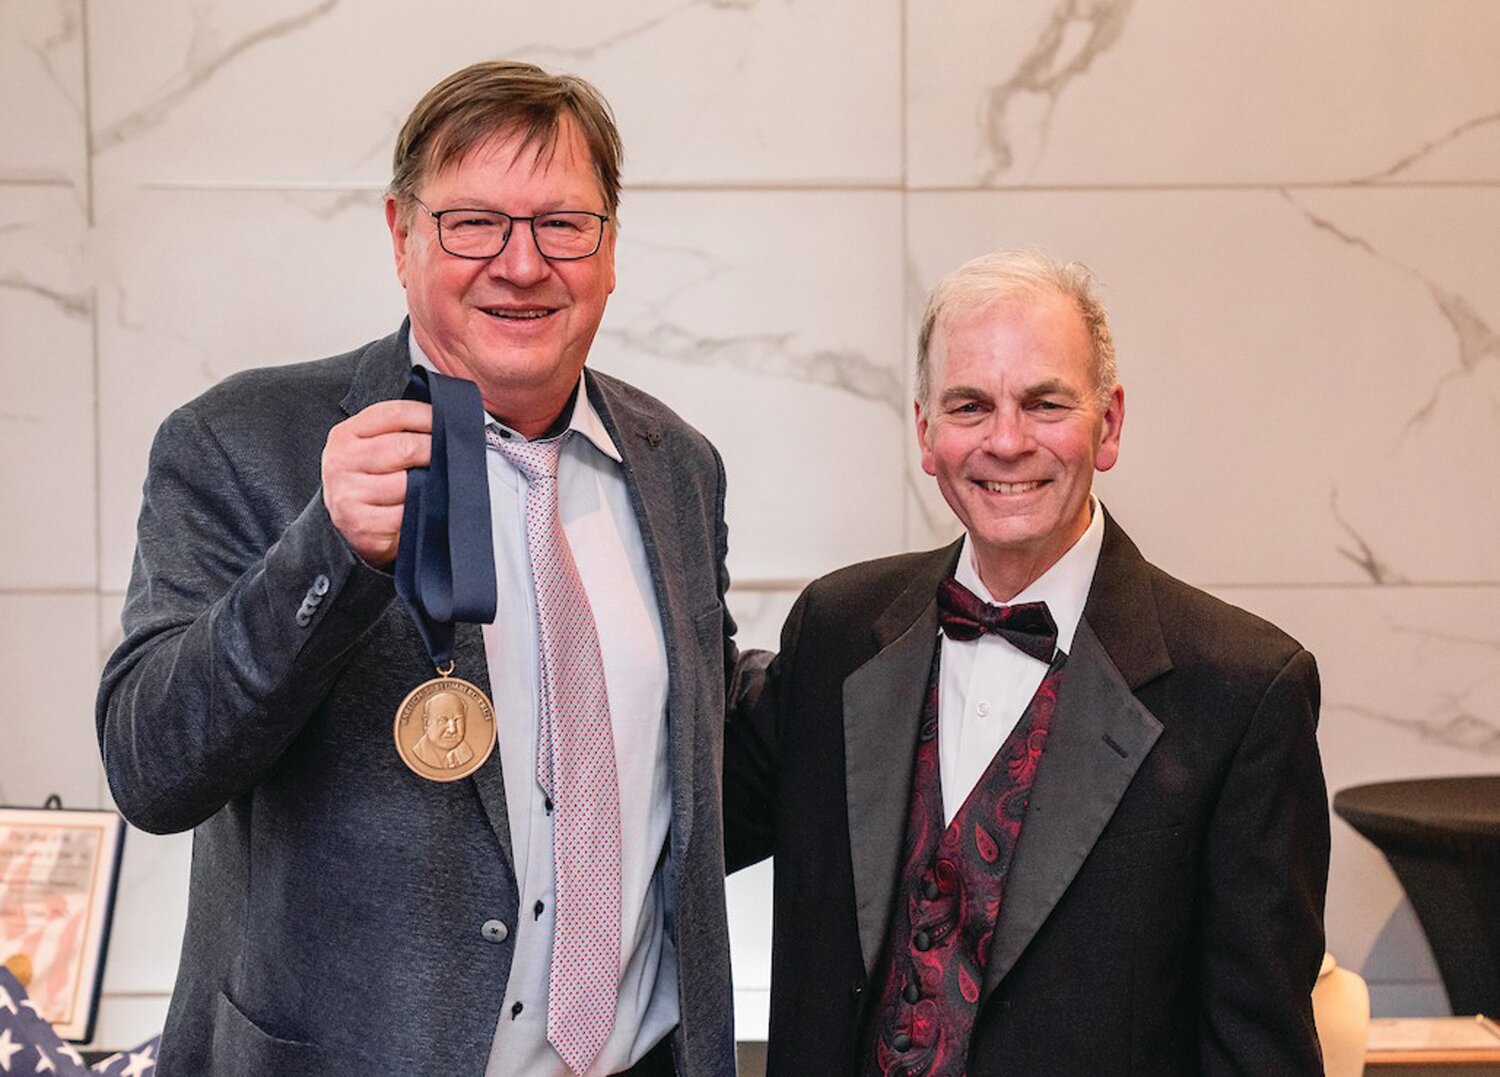 Baruch S. Blumberg Prize awardee Stephan Urban and Tim Block, co-founder and chair of the Hepatitis B Foundation Board of Directors.